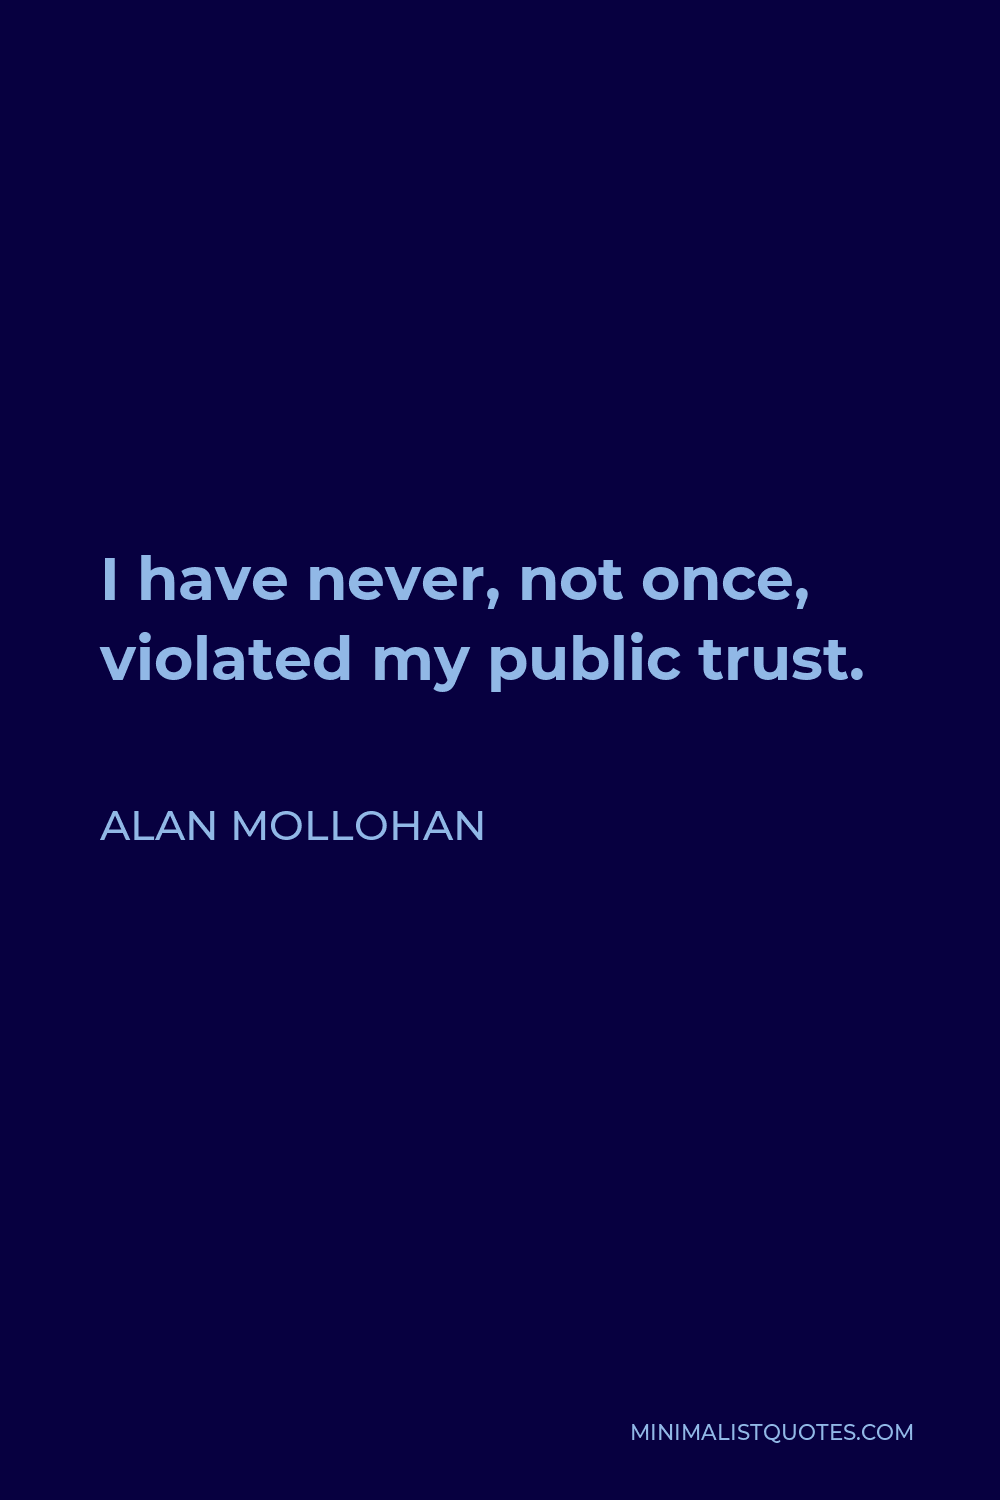 Alan Mollohan Quote - I have never, not once, violated my public trust.